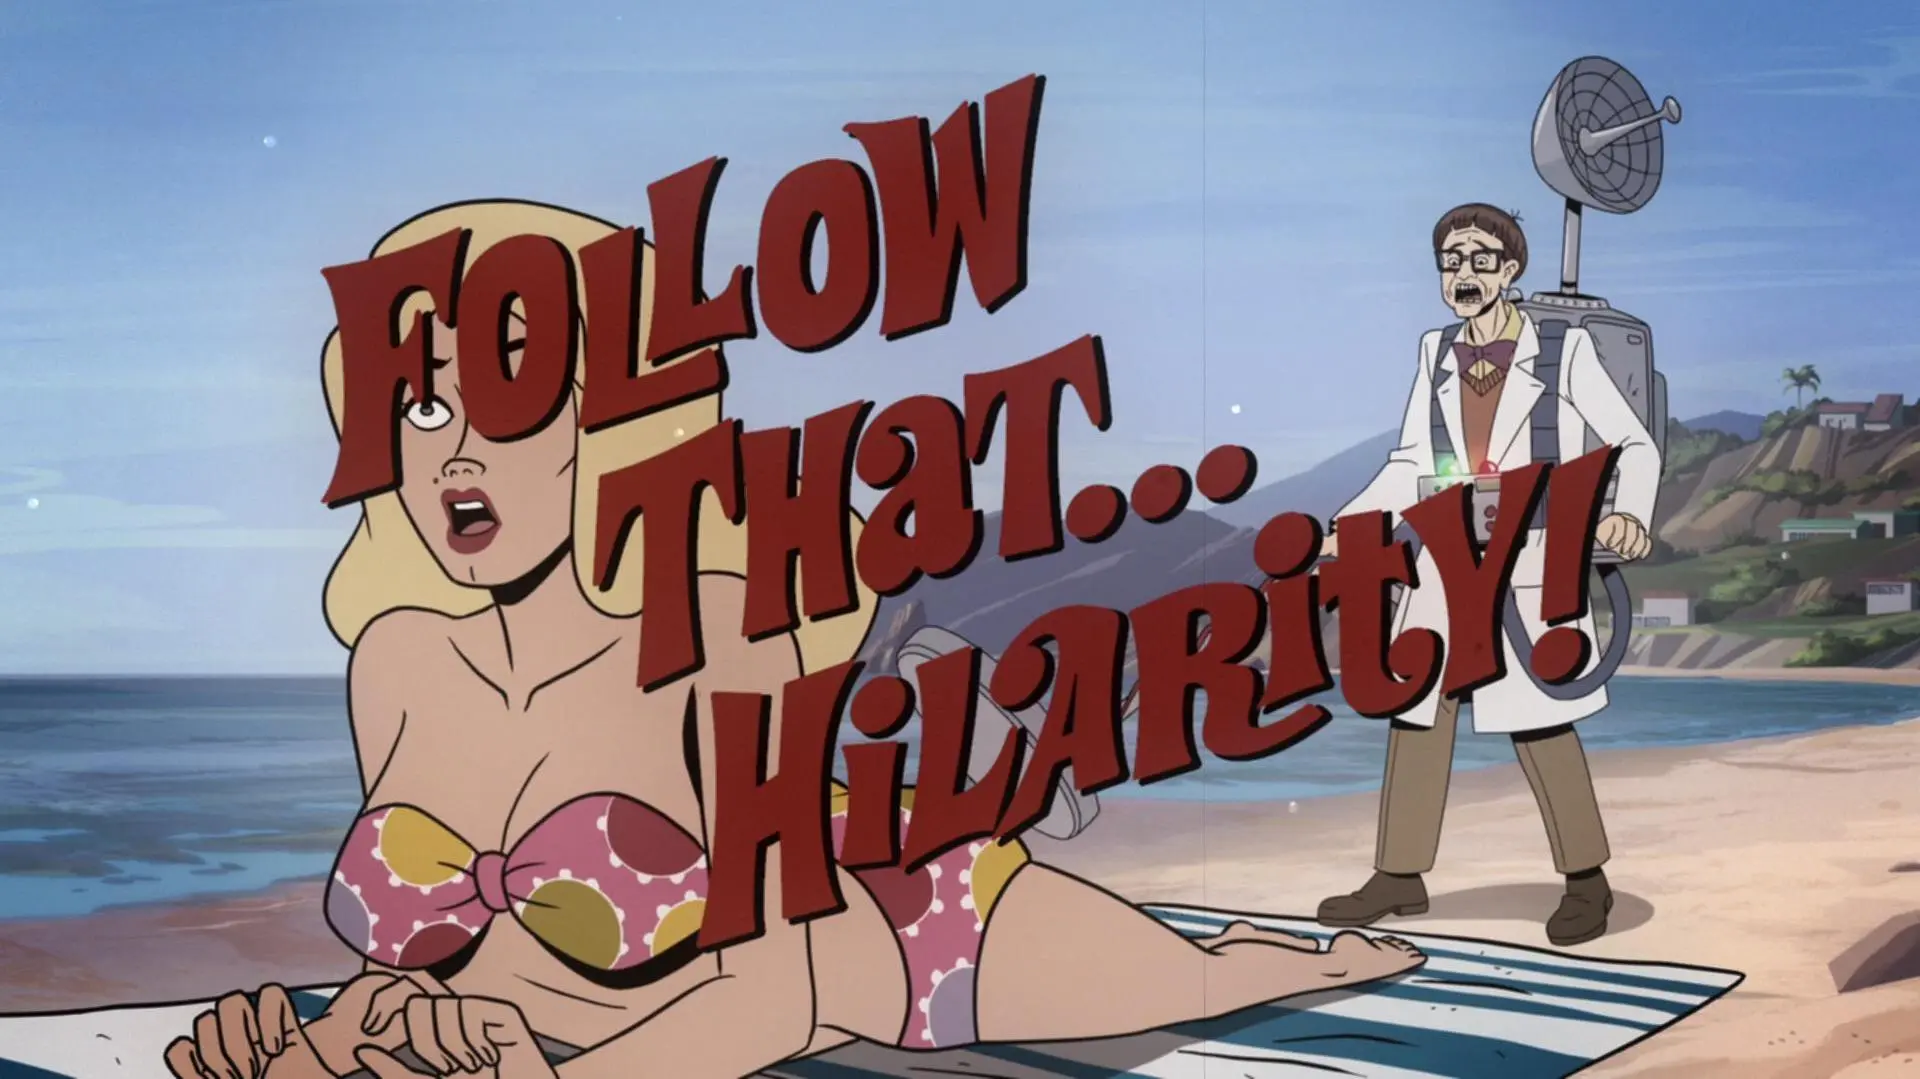 The Venture Bros.: Radiant Is the Blood of the Baboon Heart_peliplat